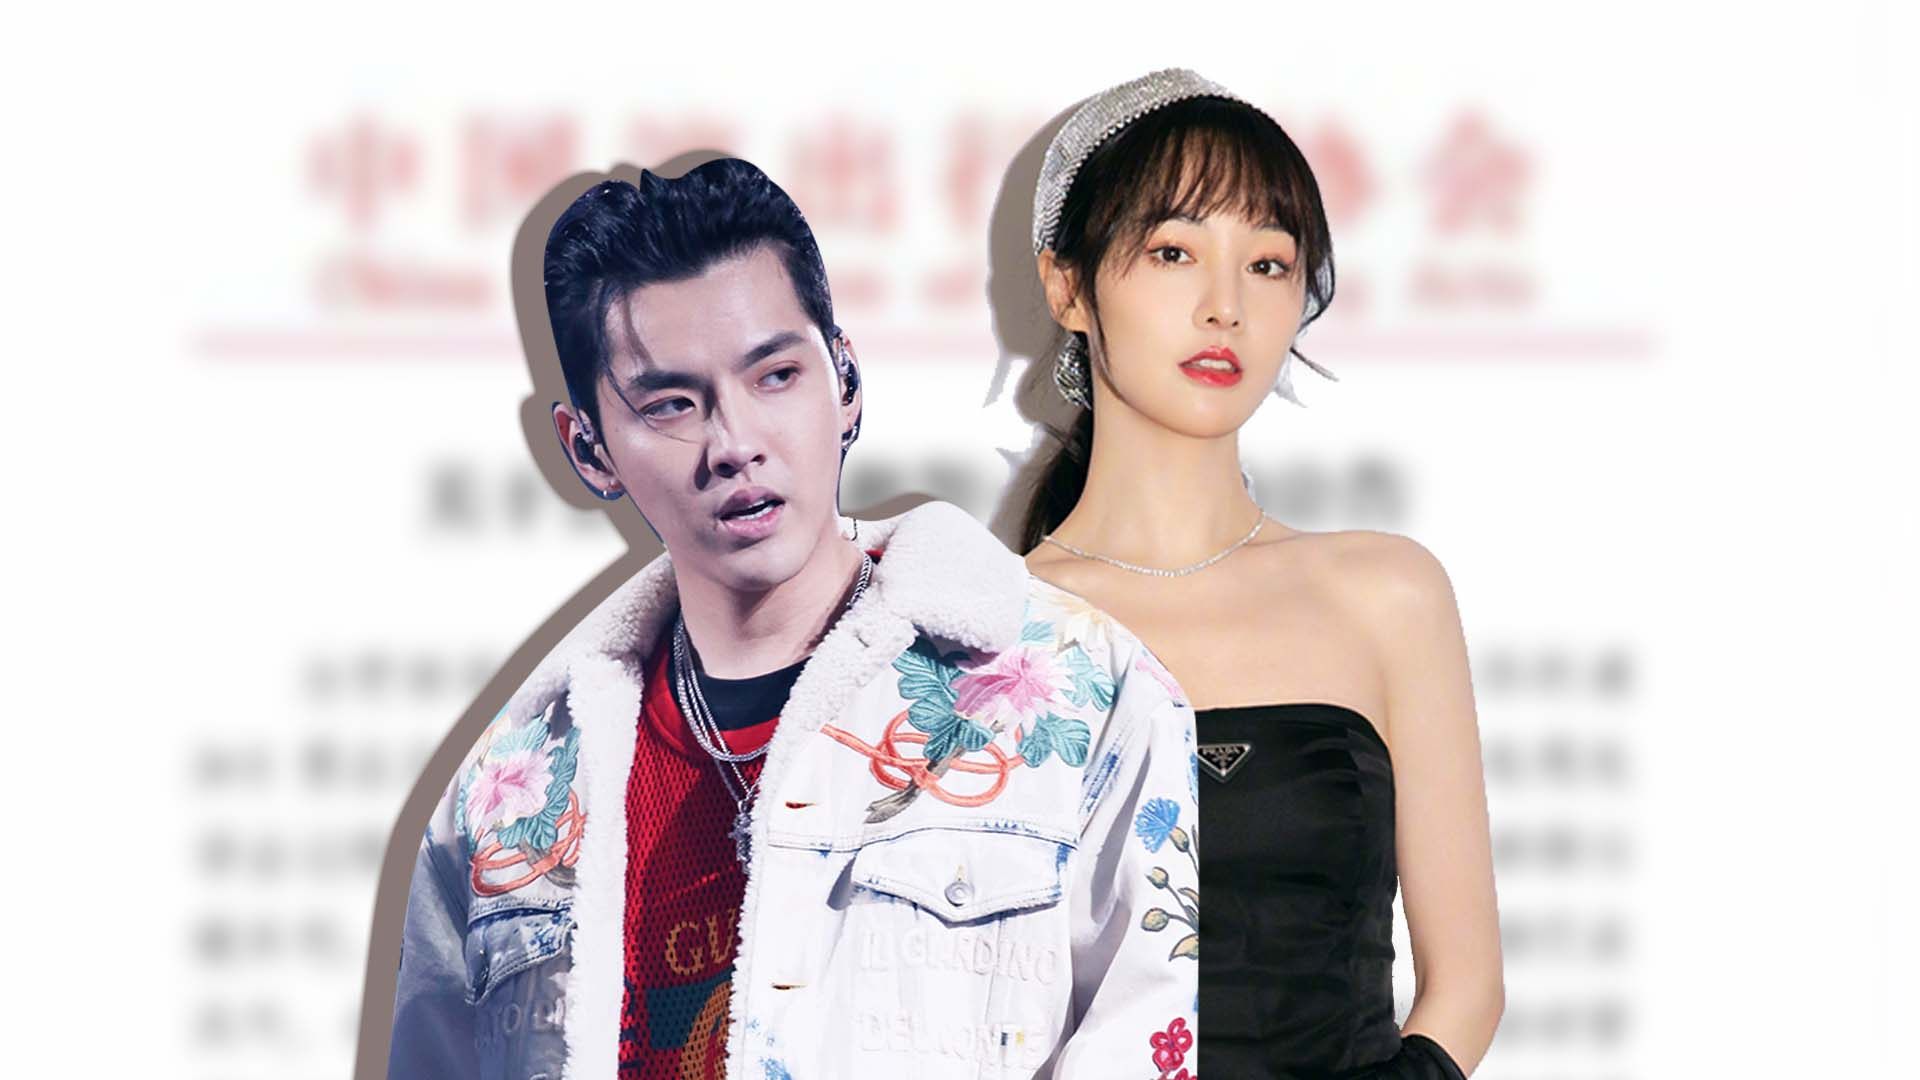 FILE--Chinese singer and actor Kris Wu or Wu Yifan poses as he